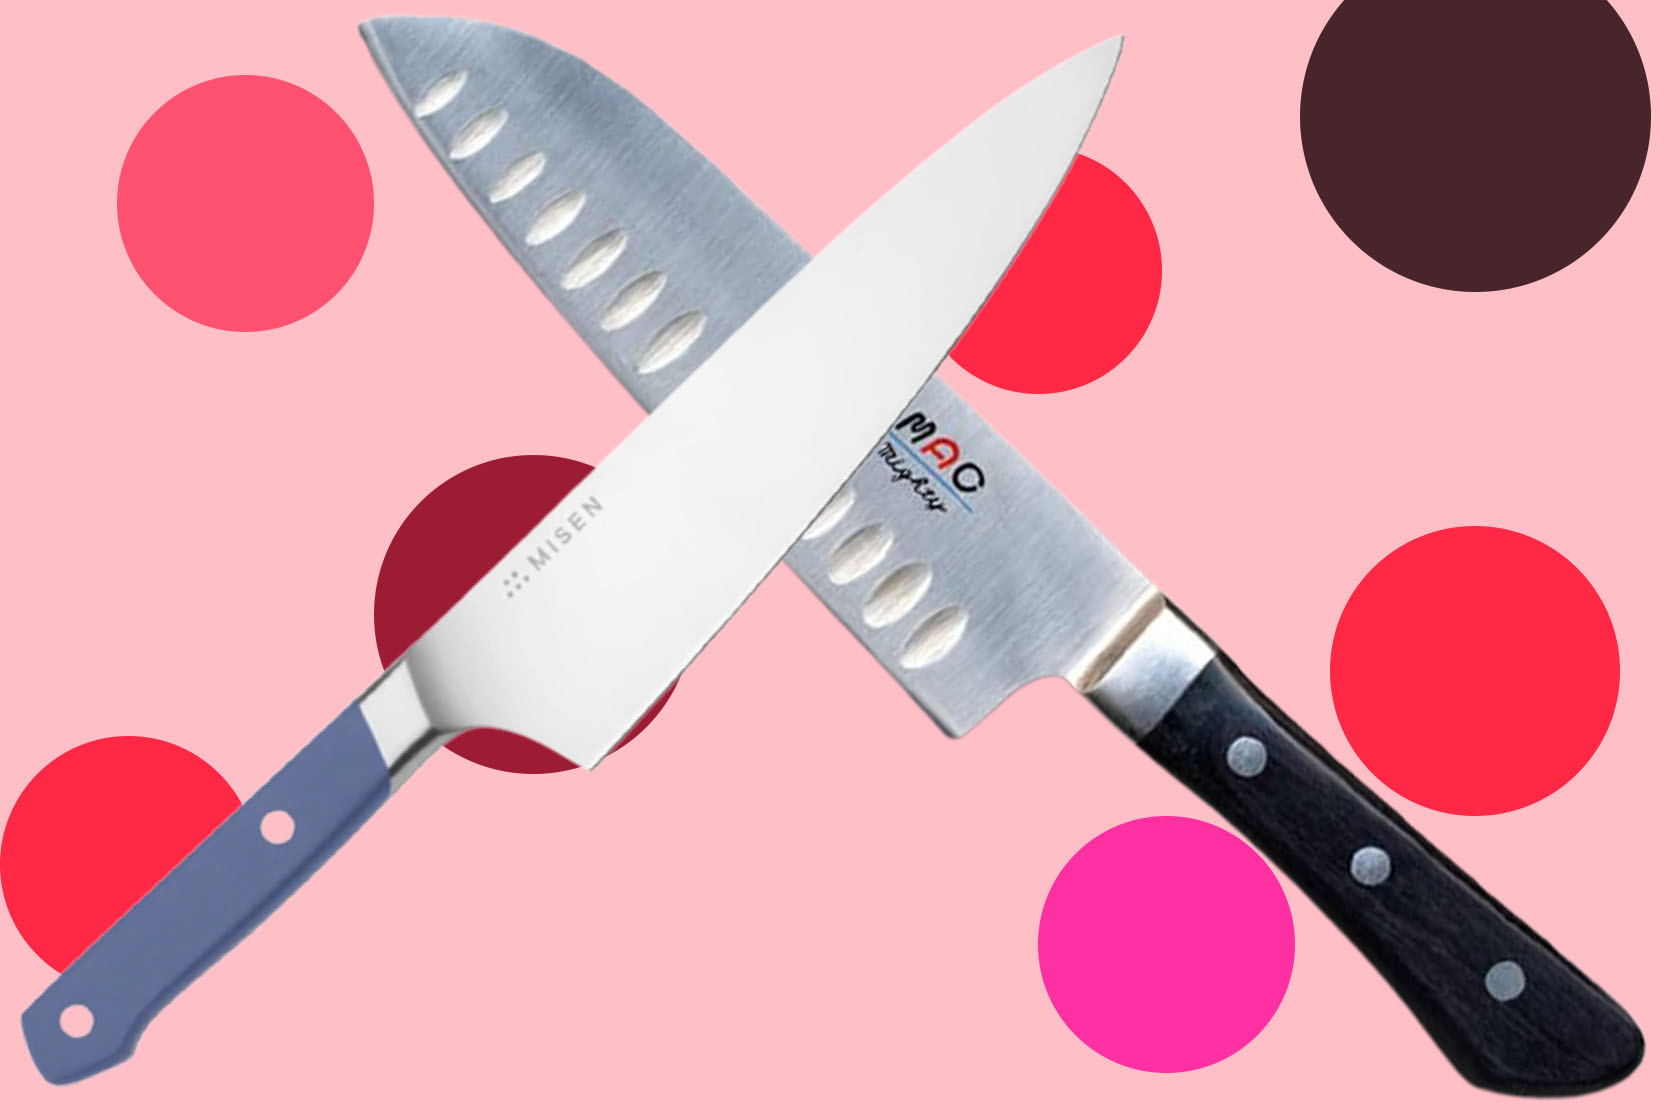 Santoku knives and chef's knives: what's the difference?